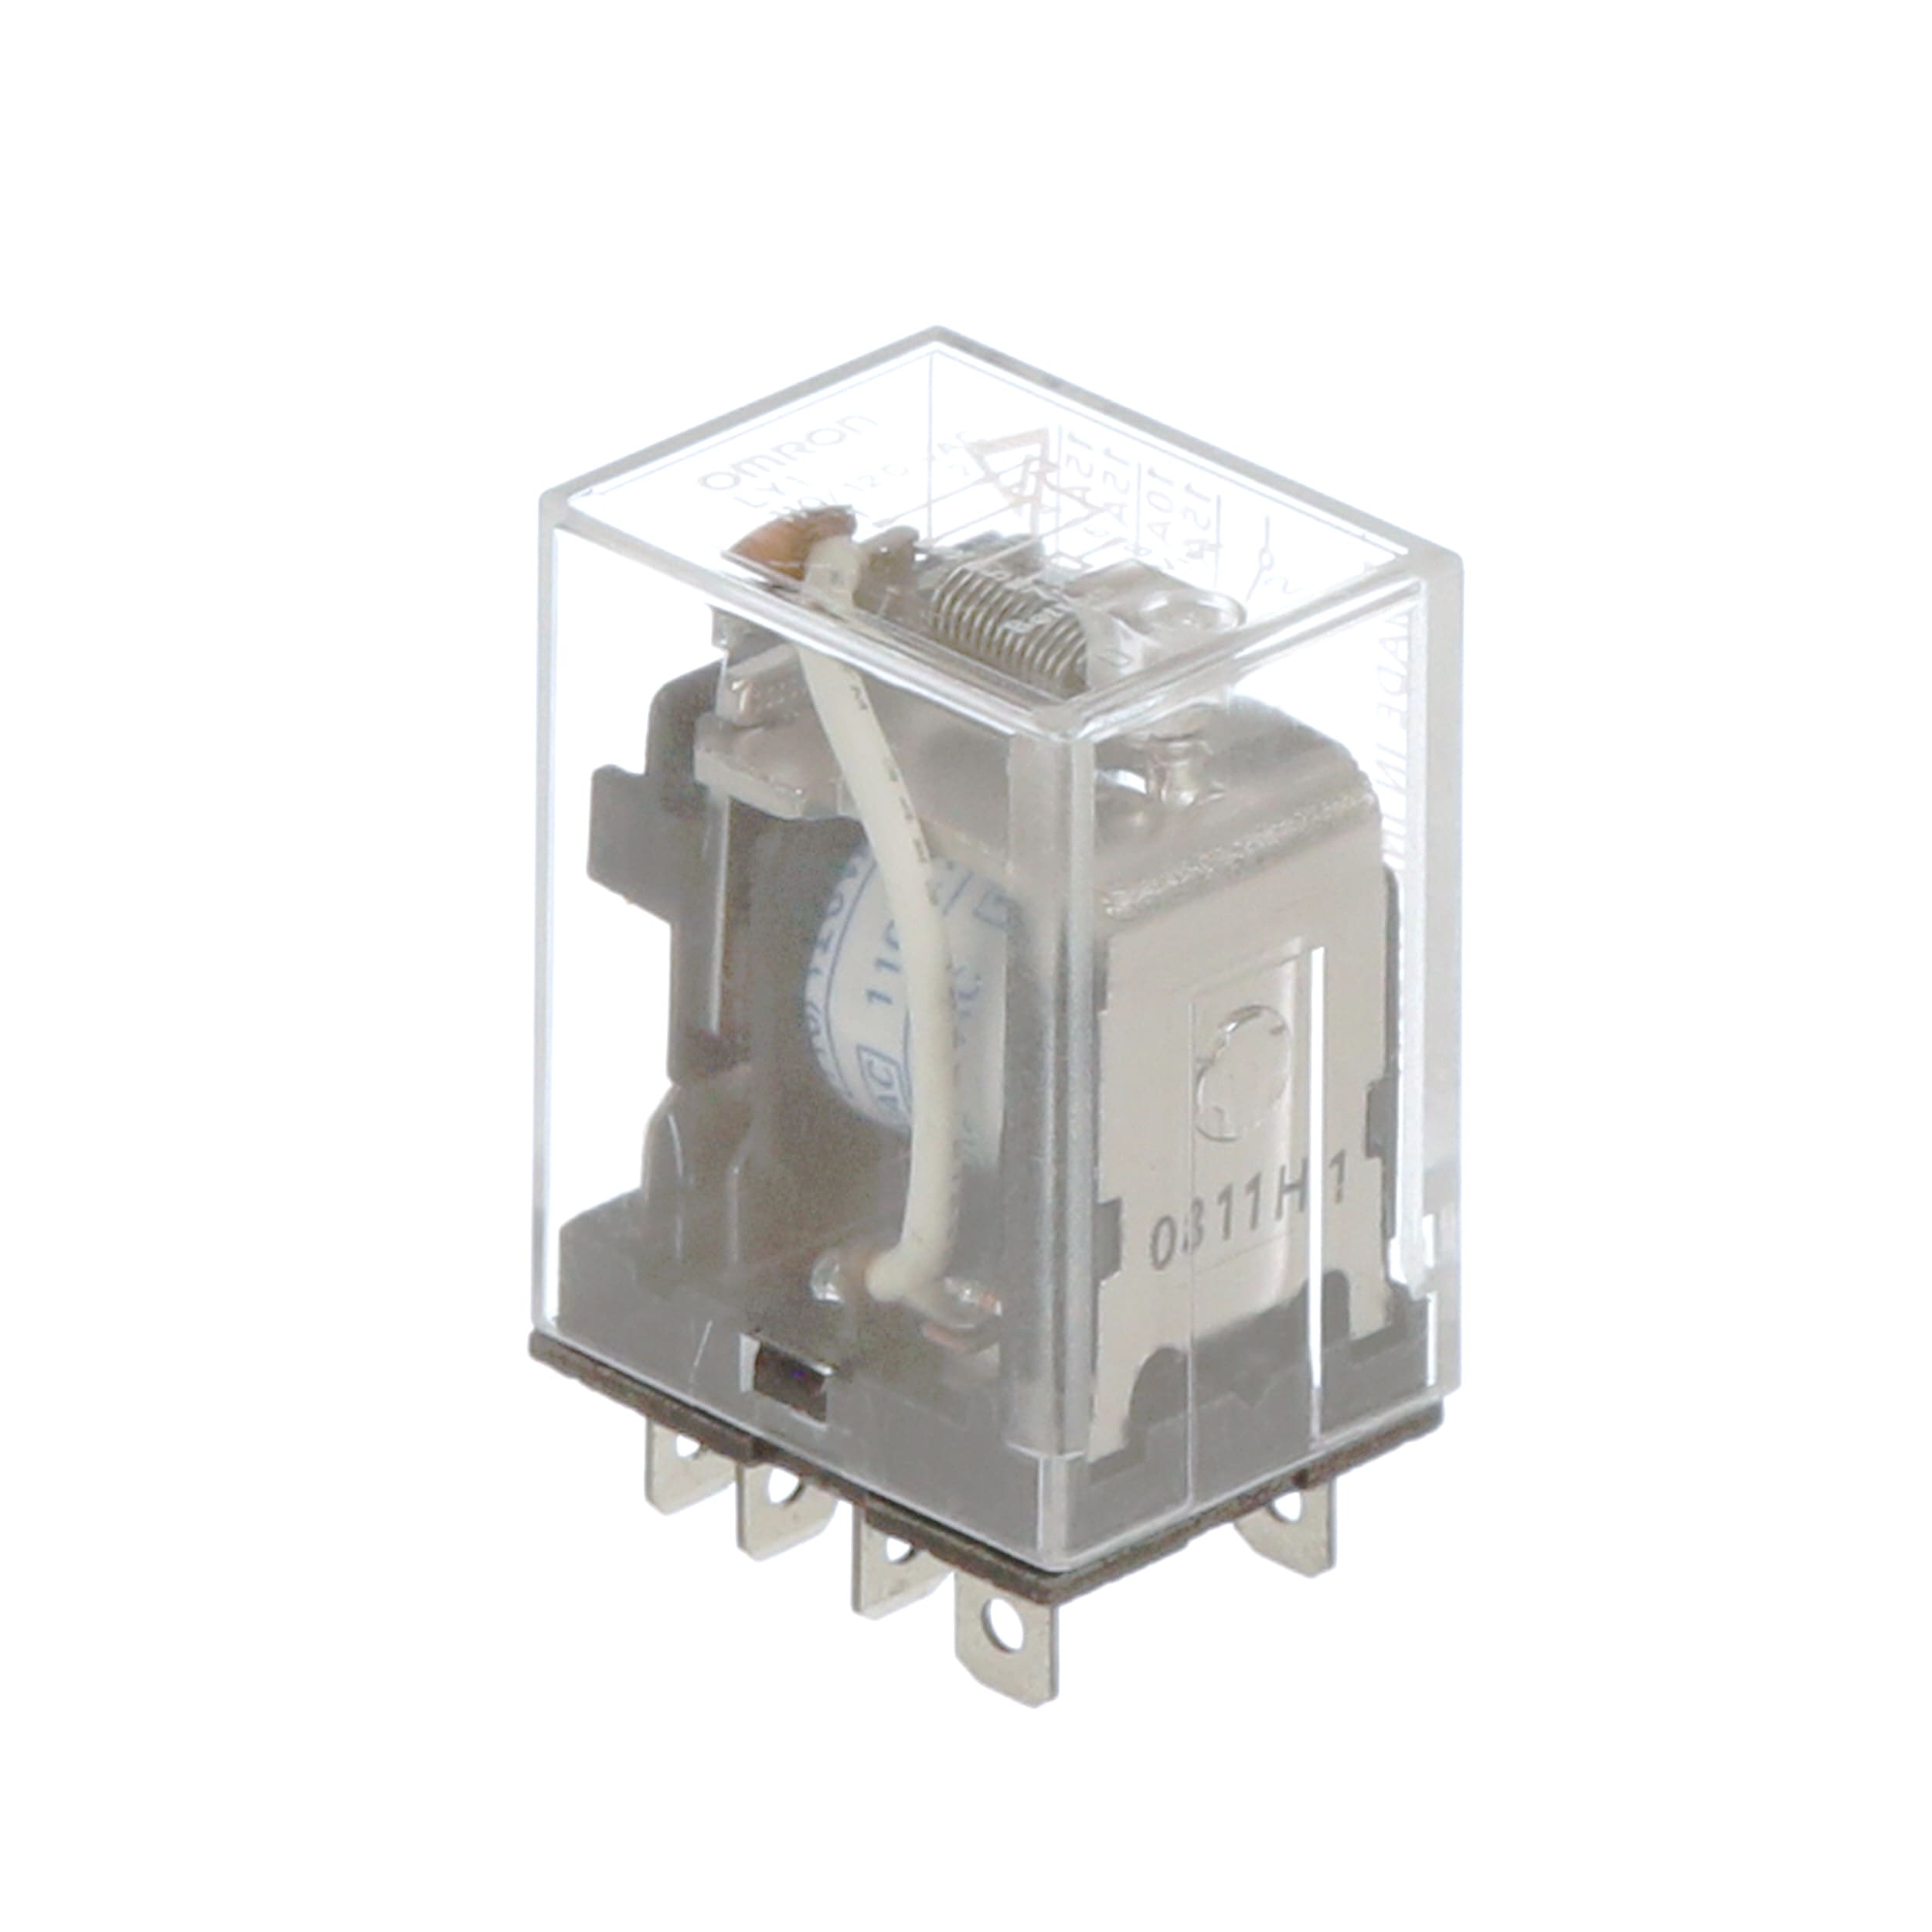 1 NEW HIGH POWER OMRON RELAY LY1S-AC110/120 VAC COIL SPDT 15A@240V AC/30 DC USA 